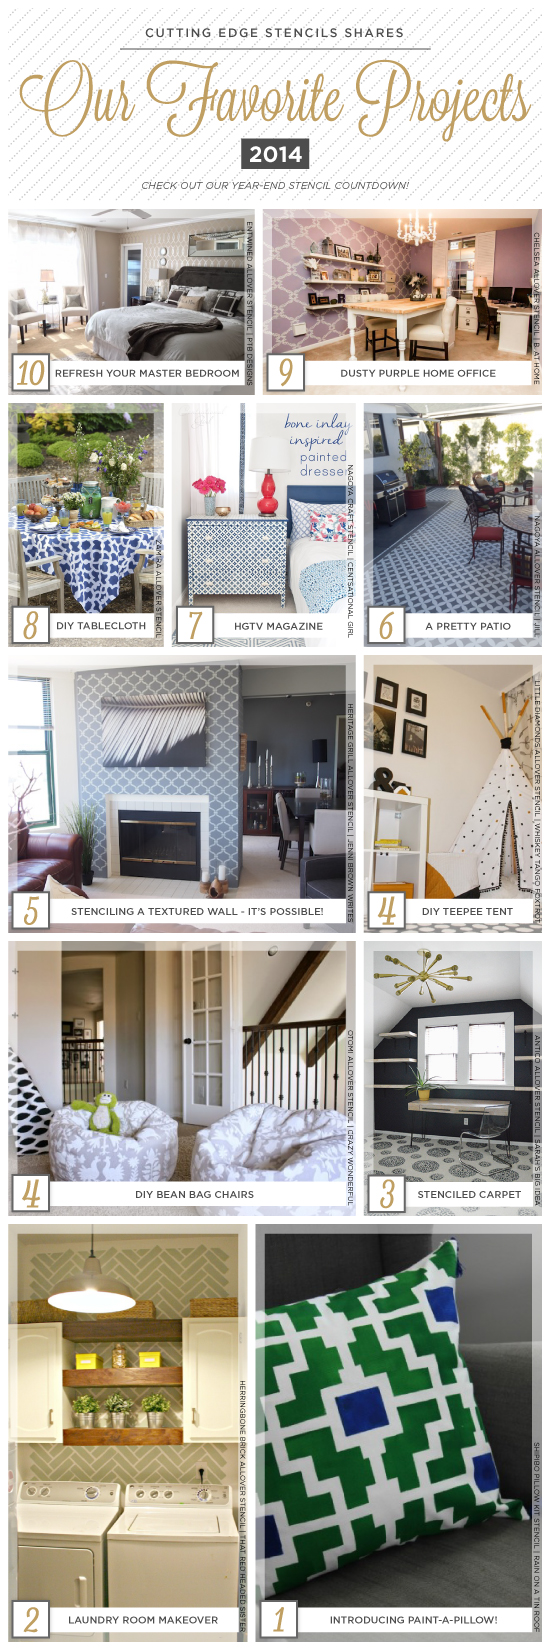 Cutting Edge Stencils shares their favorite stenciled accent walls, furniture, and home decor projects of 2014. http://www.cuttingedgestencils.com/wall-stencils-stencil-designs.html